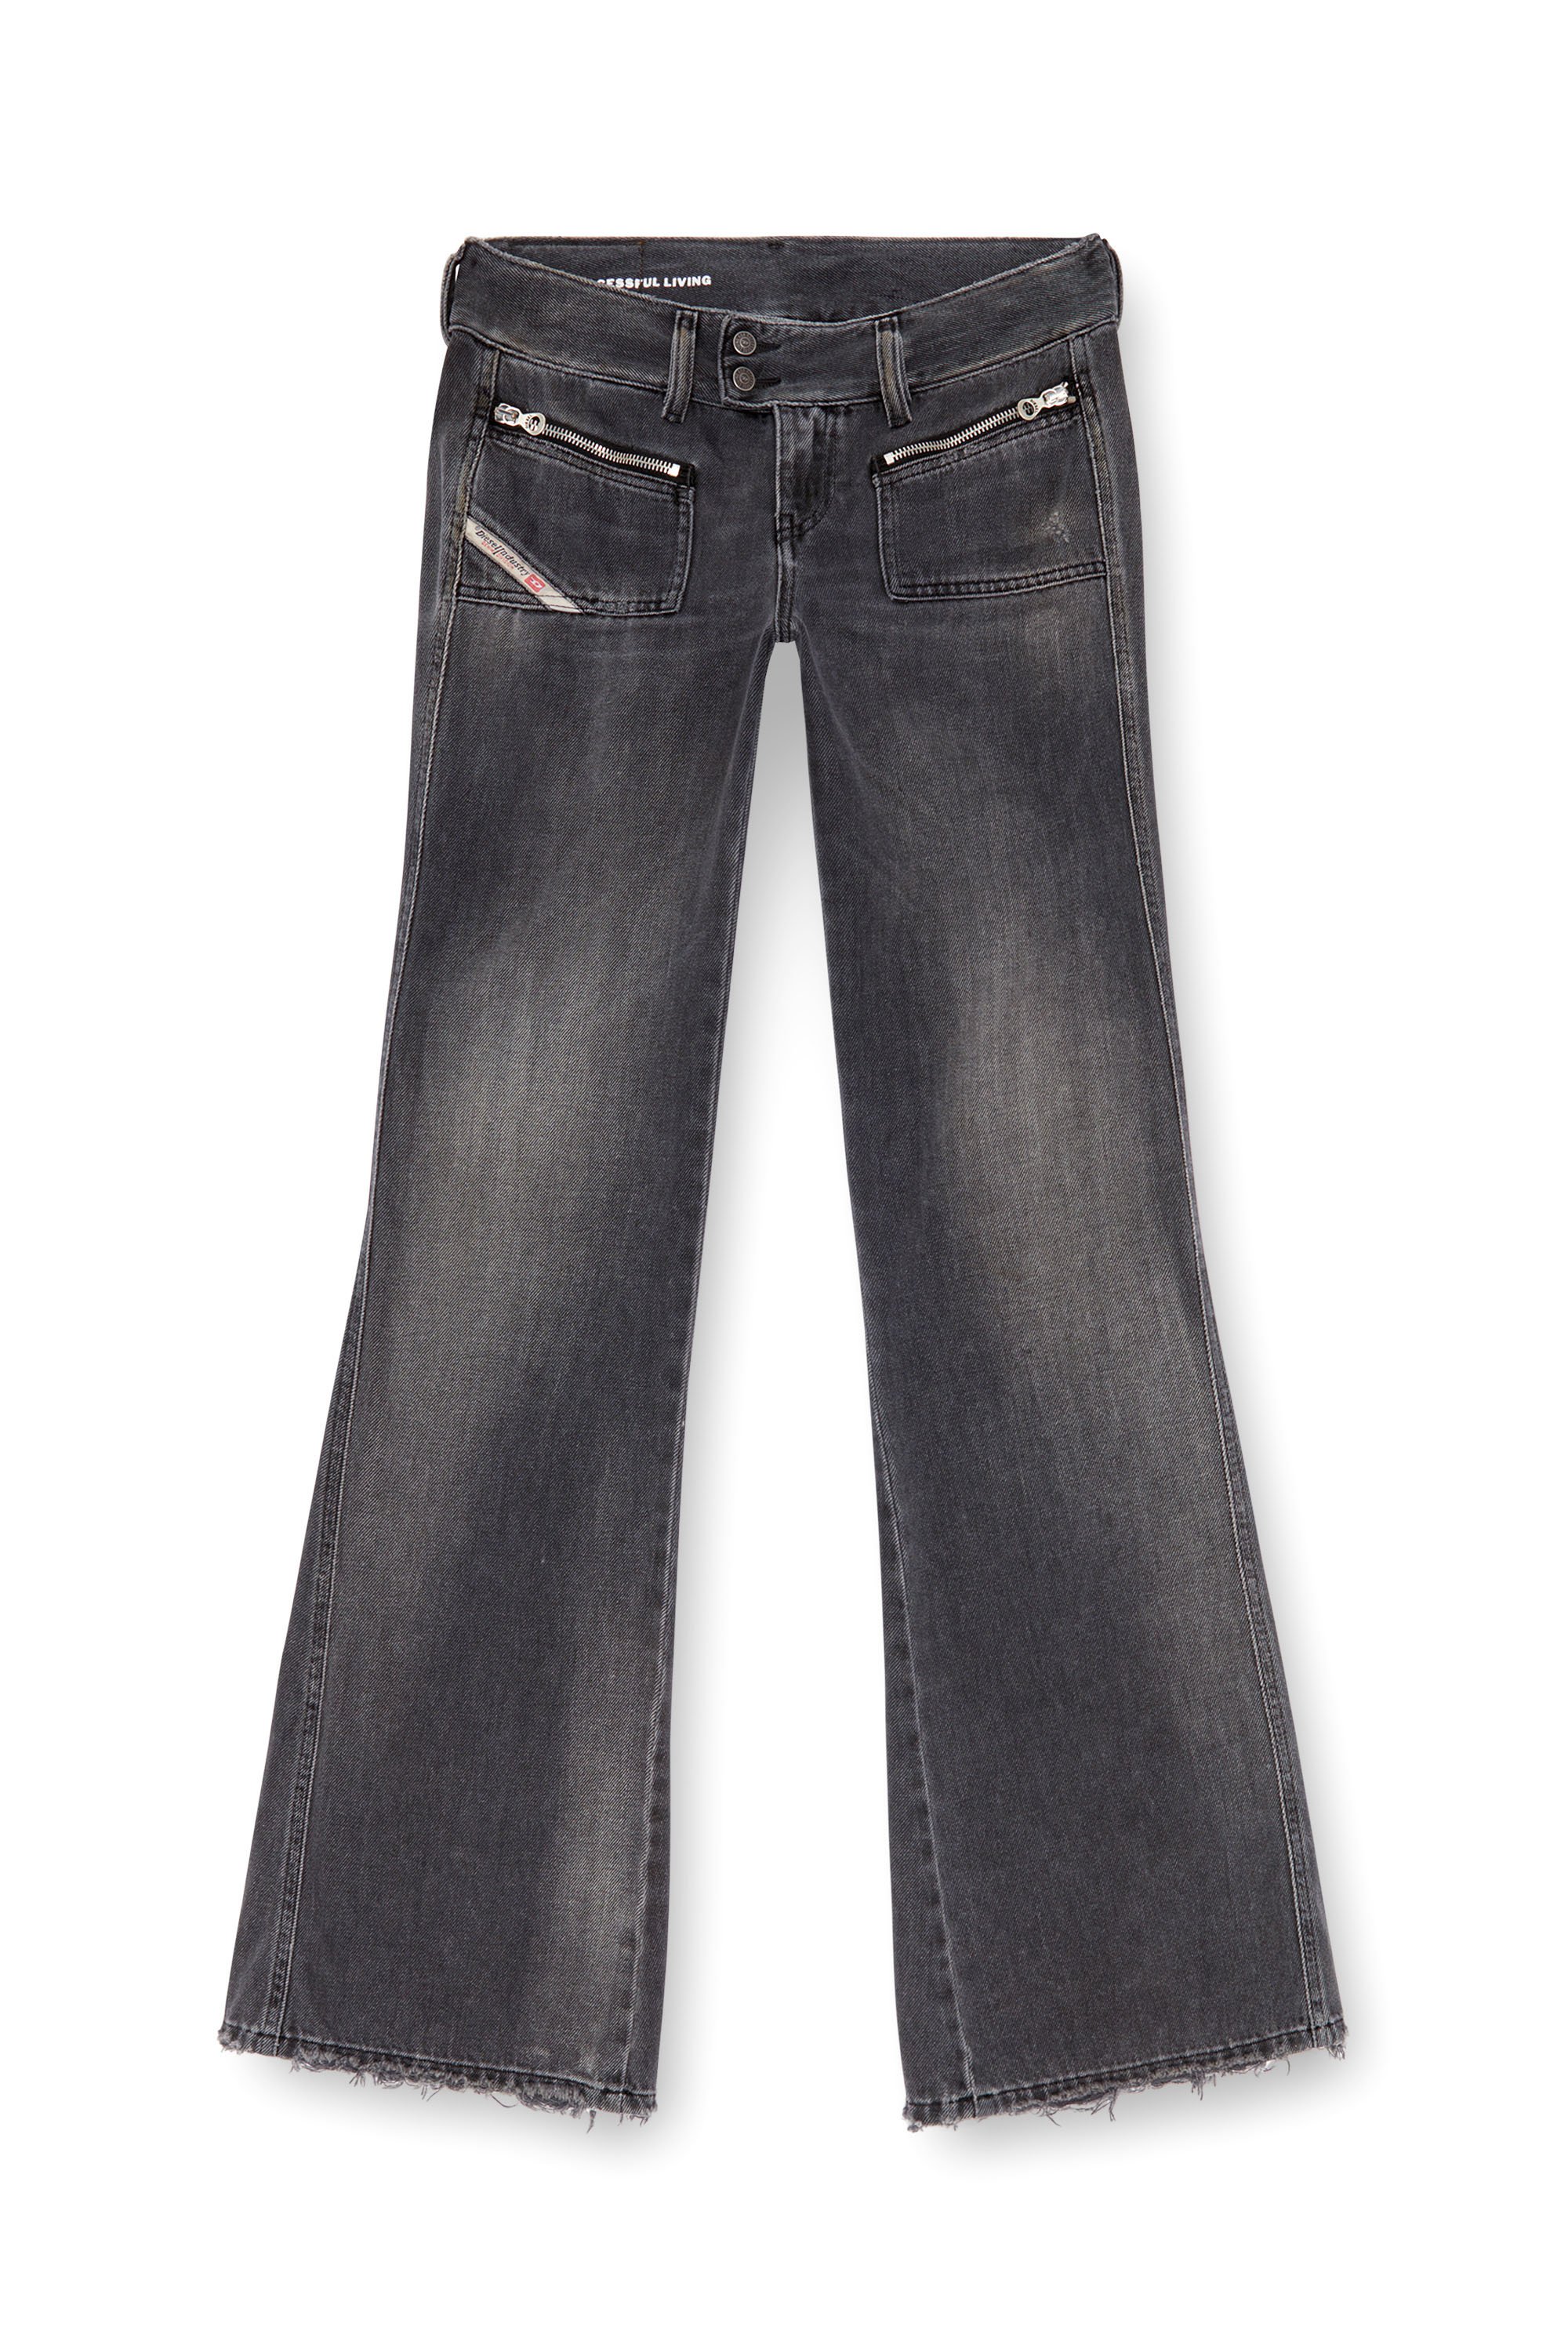 Diesel - Bootcut and Flare Jeans D-Hush 09K14, Mujer Bootcut y Flare Jeans - D-Hush in Negro - Image 3